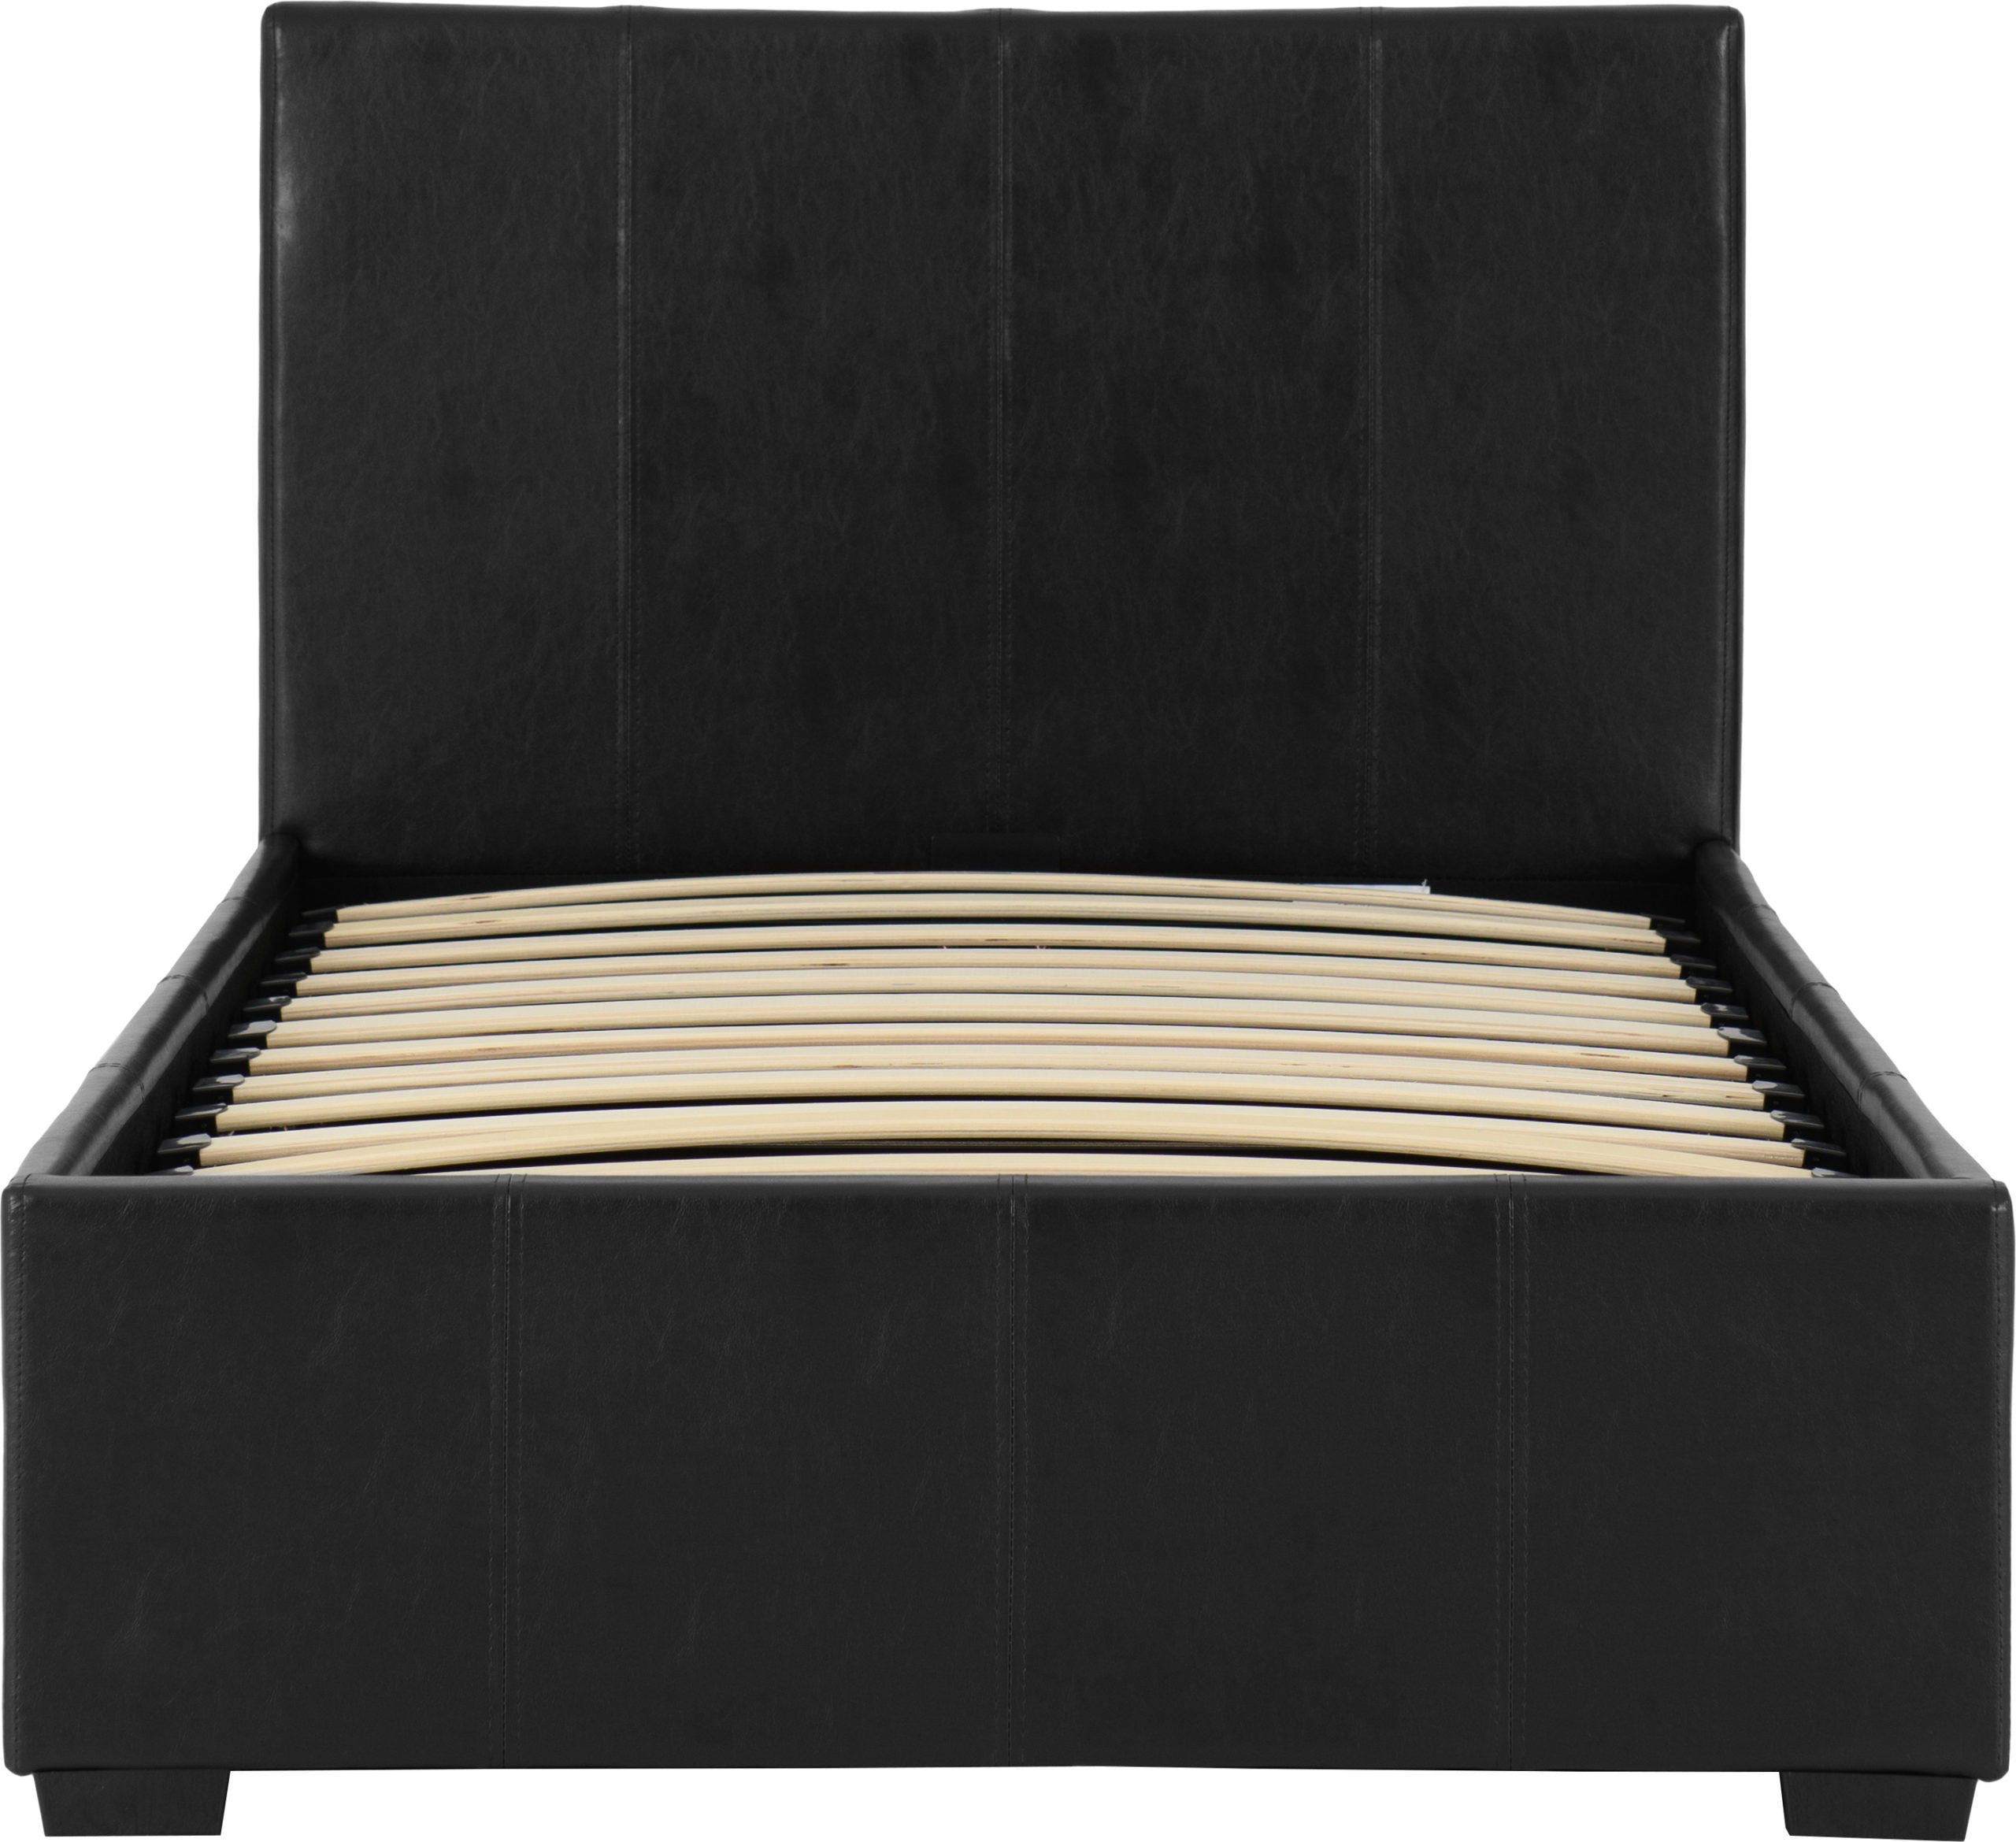 Waverley 3ft Single Gas Lift Storage Bed in Black PU Leather